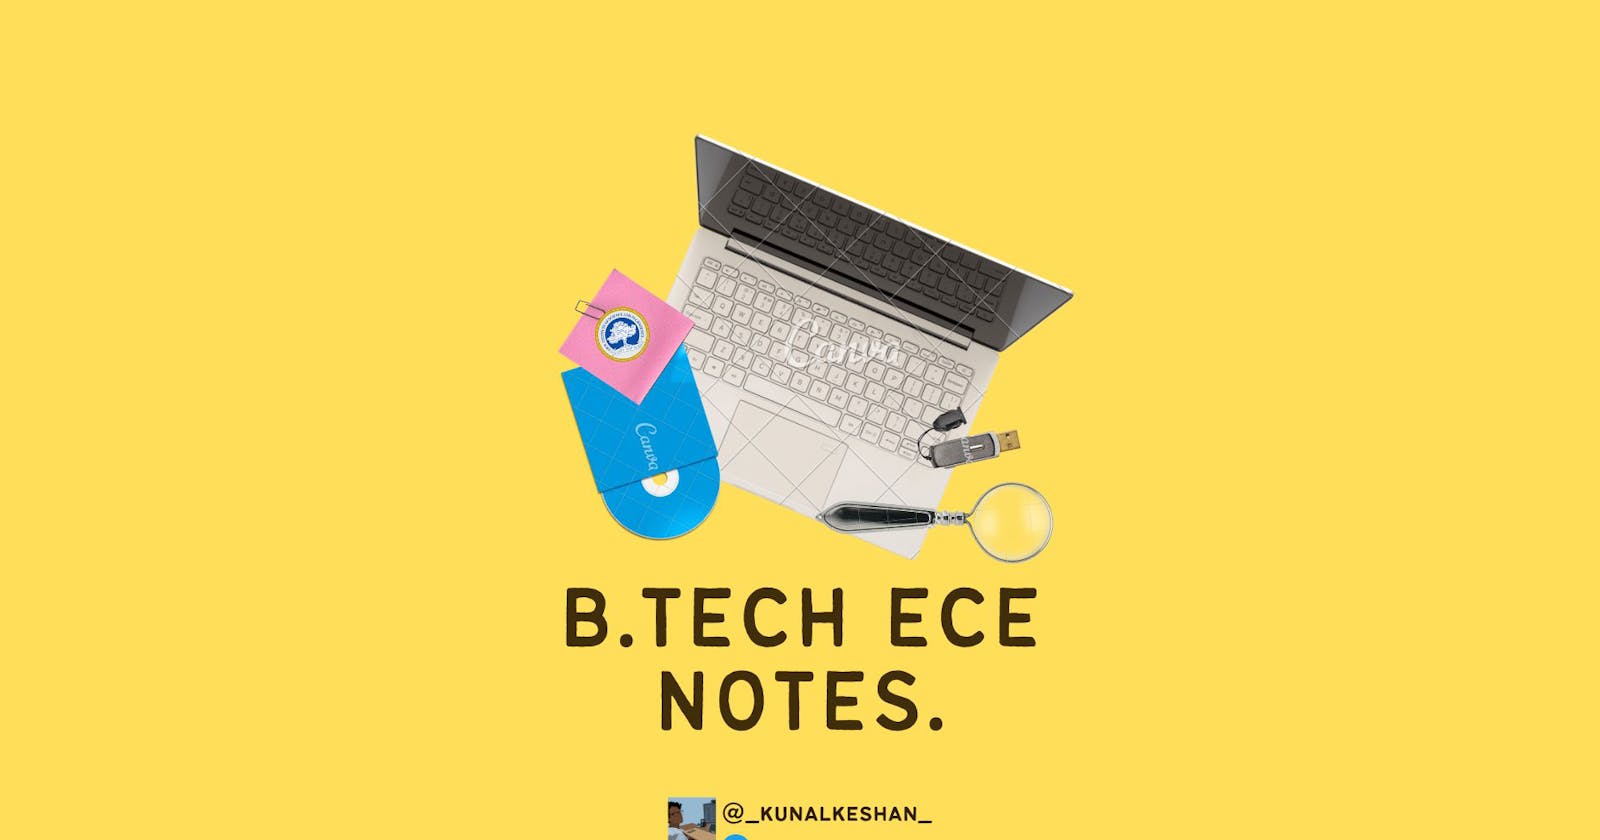 The best collection of ECE Notes you'll ever find!